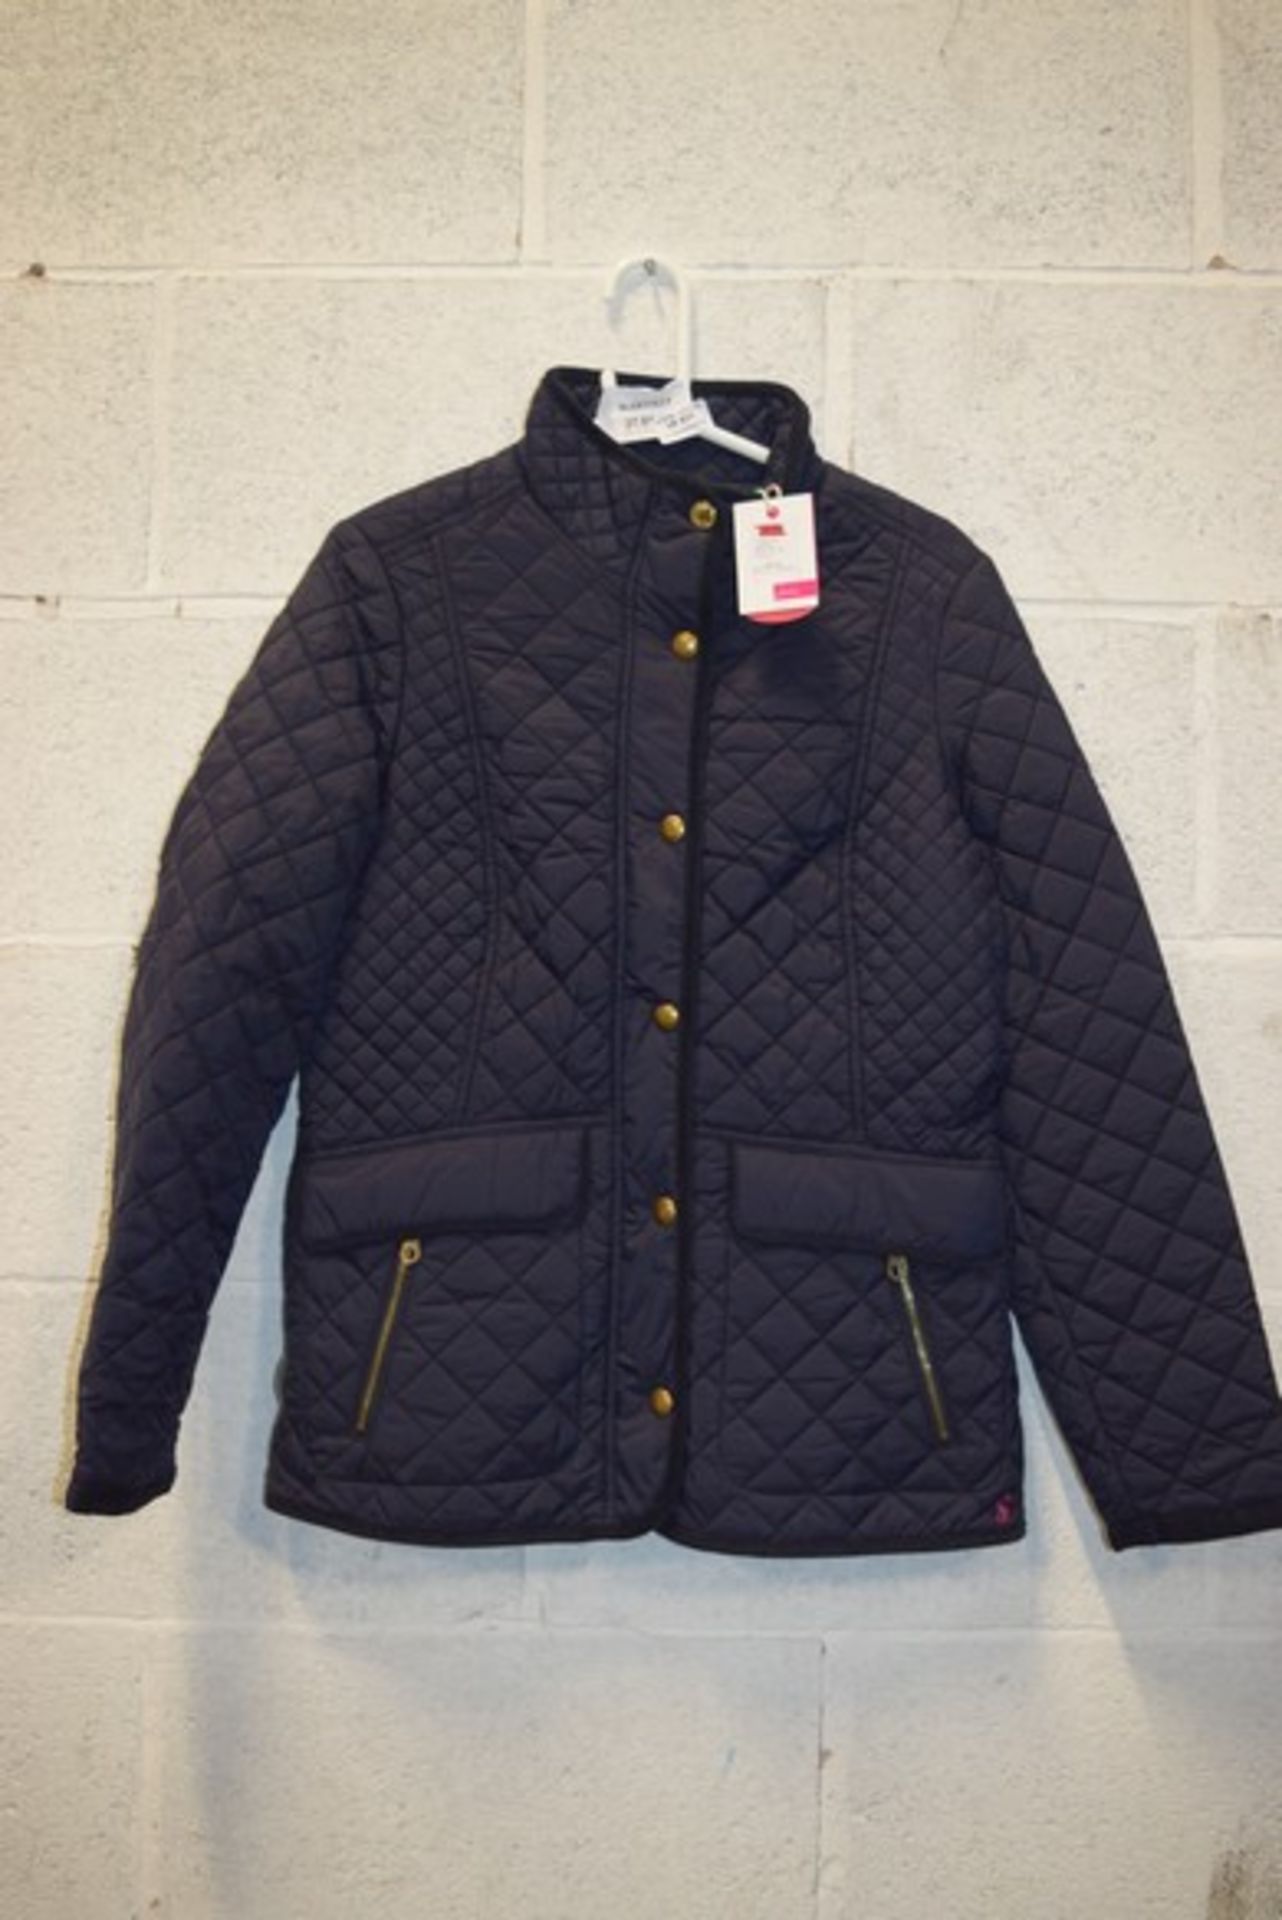 1 x JOULES LADIES PADDED JACKET SIZE 12 RRP £90 27.01.17 *PLEASE NOTE THAT THE BID PRICE IS